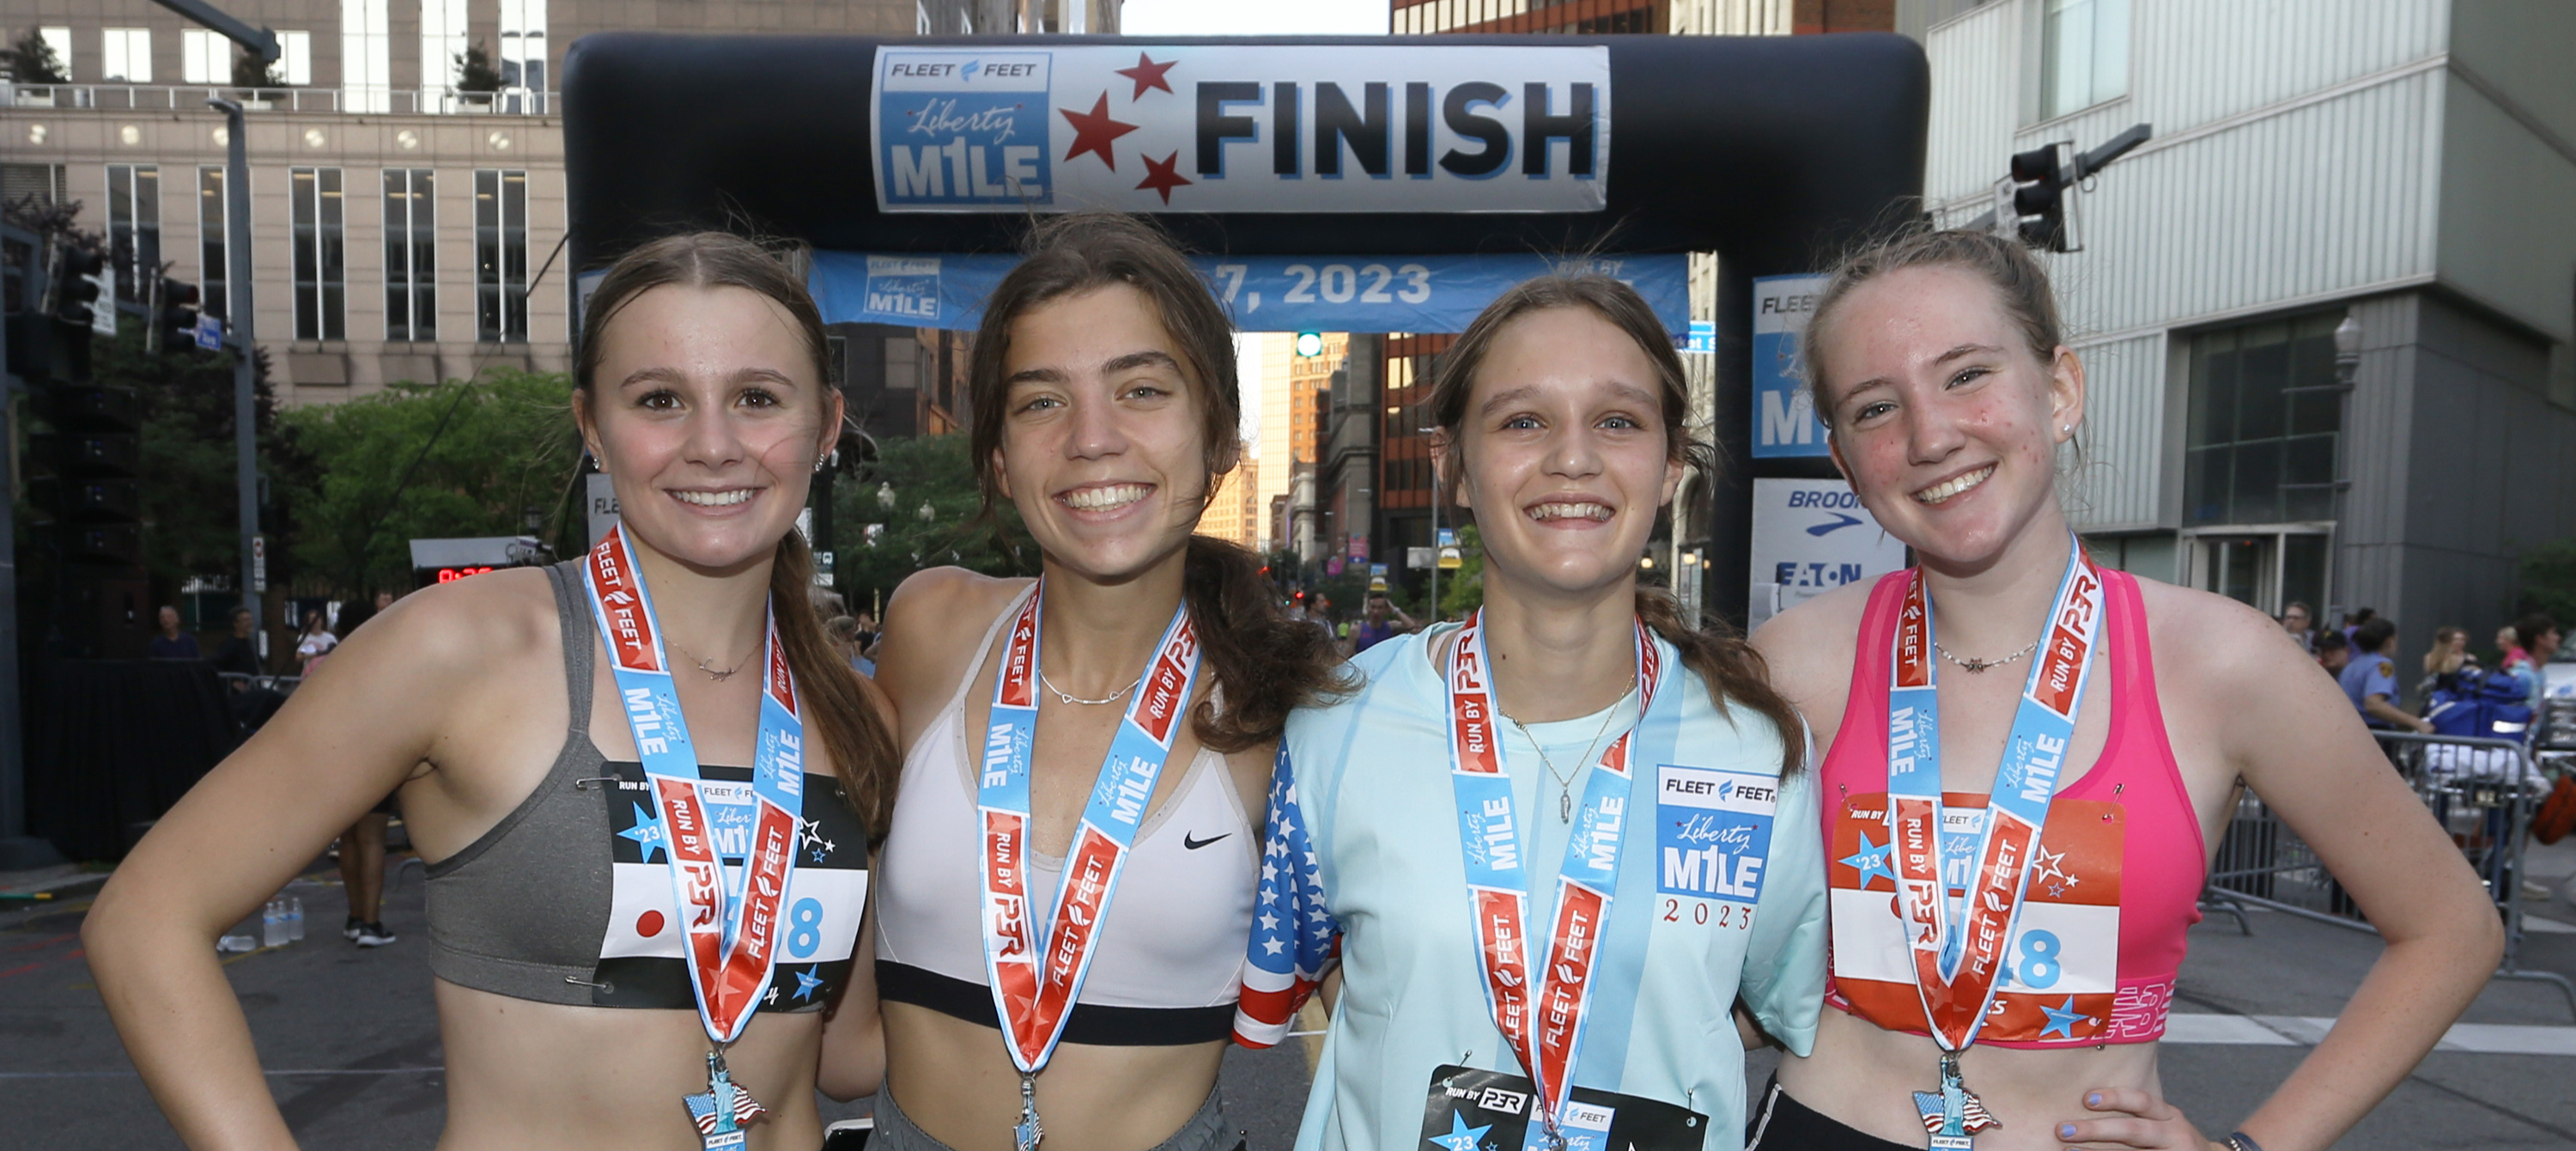 Four young women at the 2023 liberty mile